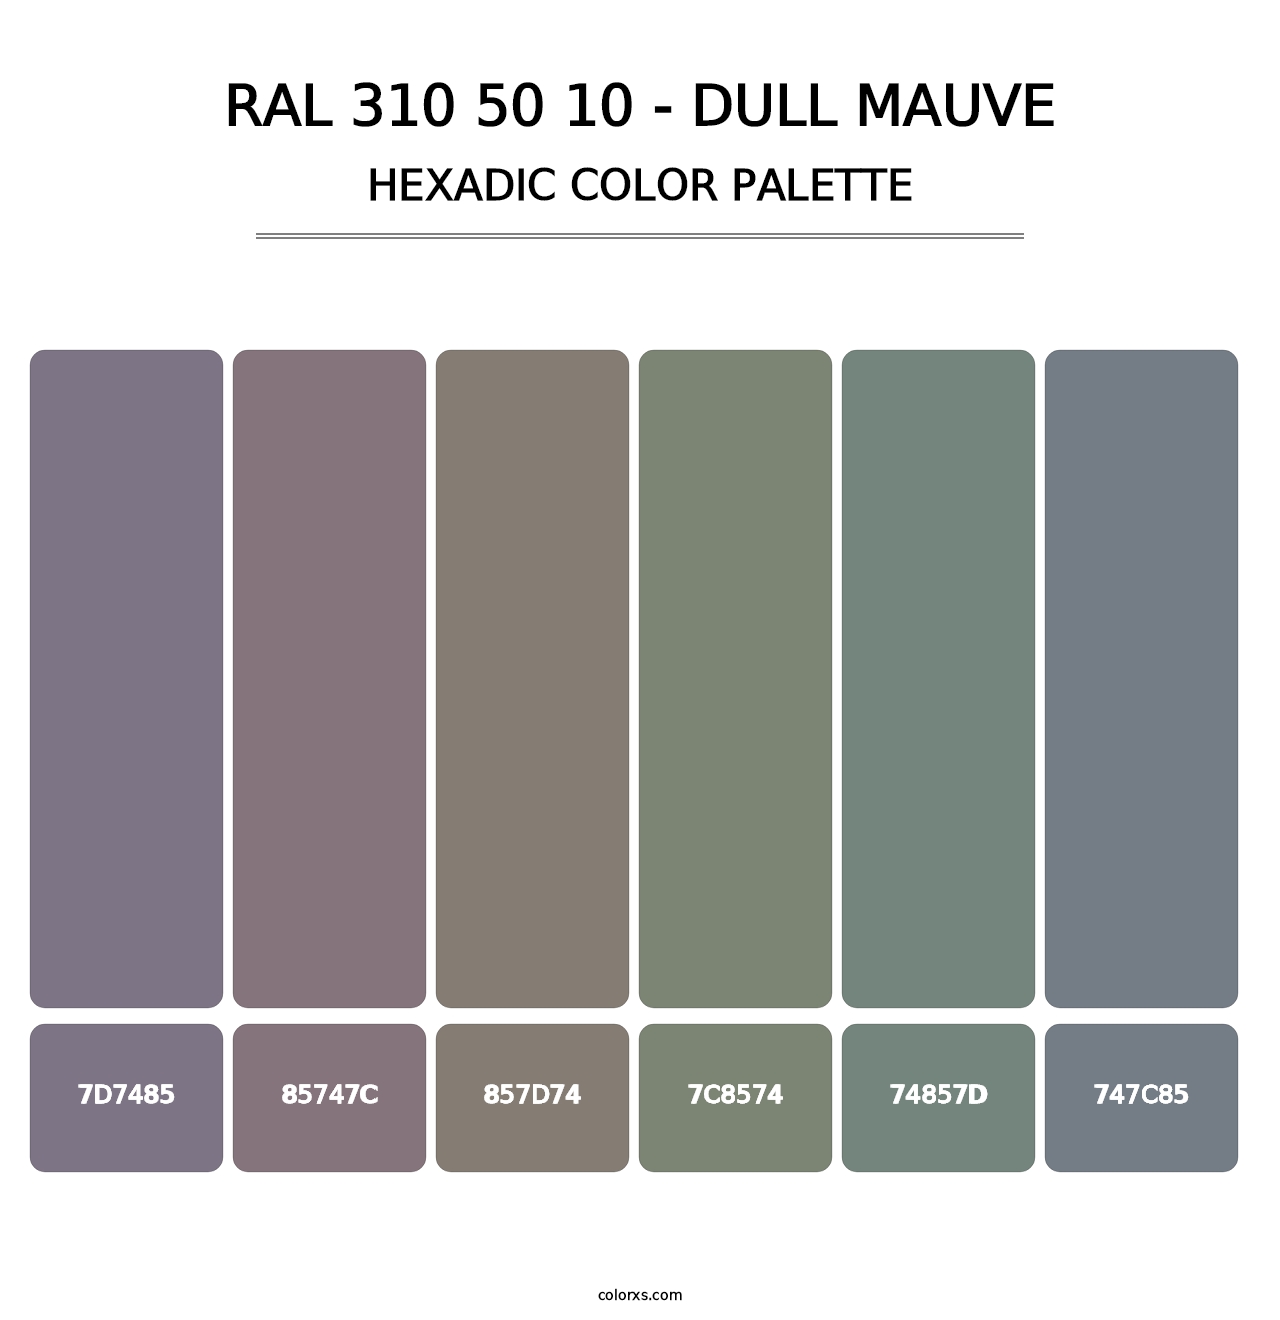 RAL 310 50 10 - Dull Mauve - Hexadic Color Palette